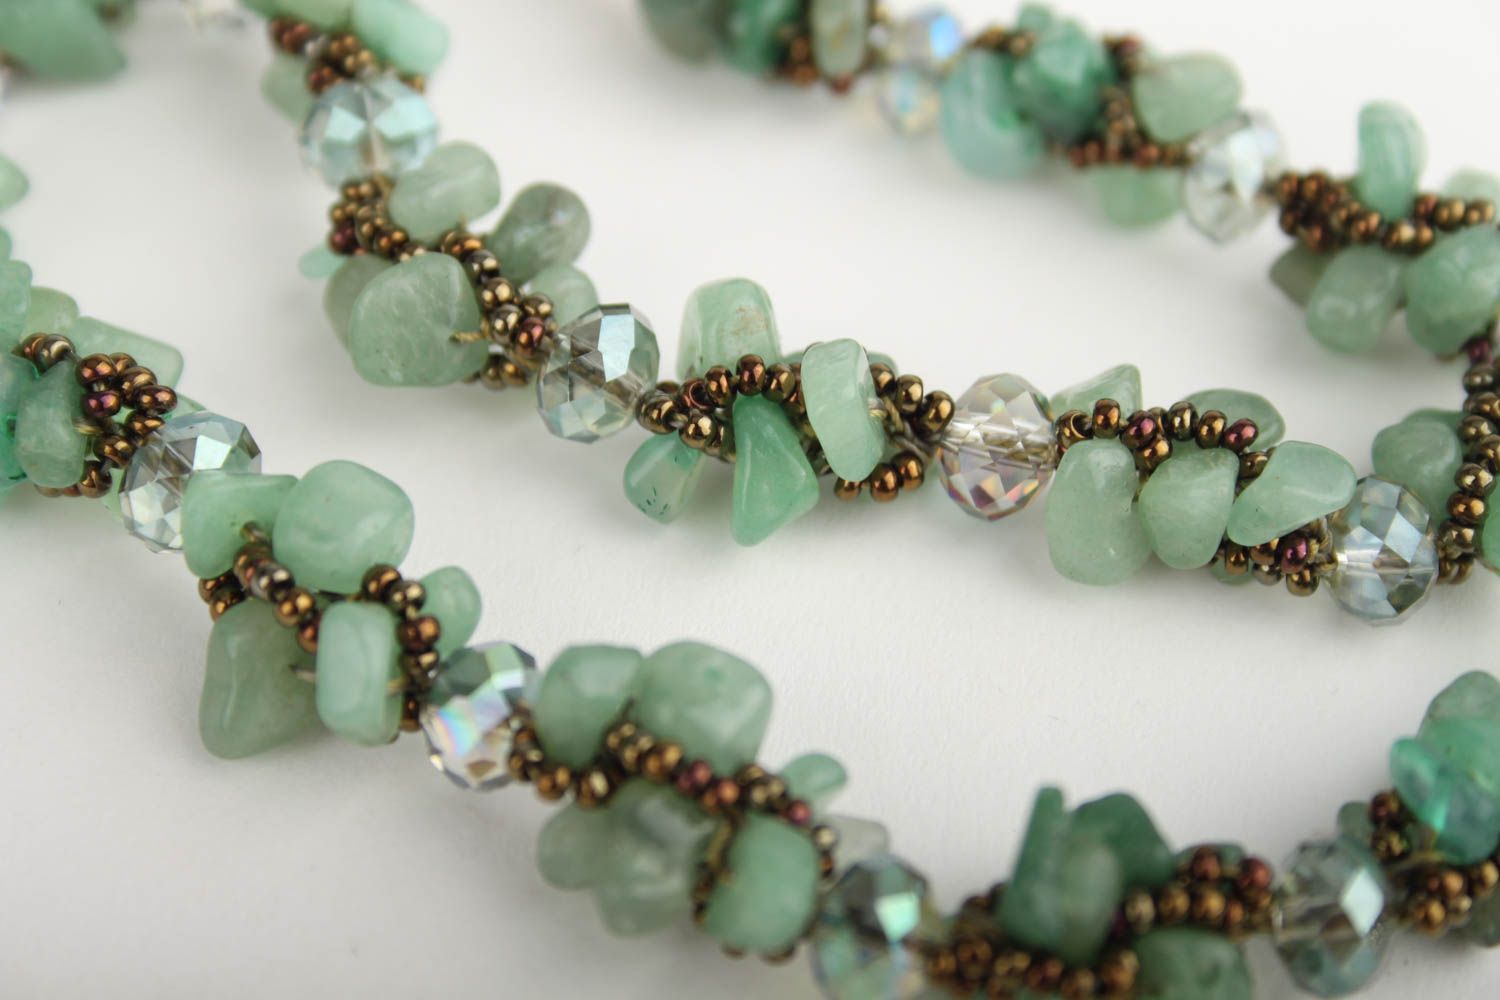 Handmade beaded necklace handmade necklace with natural stones stylish jewelry photo 4